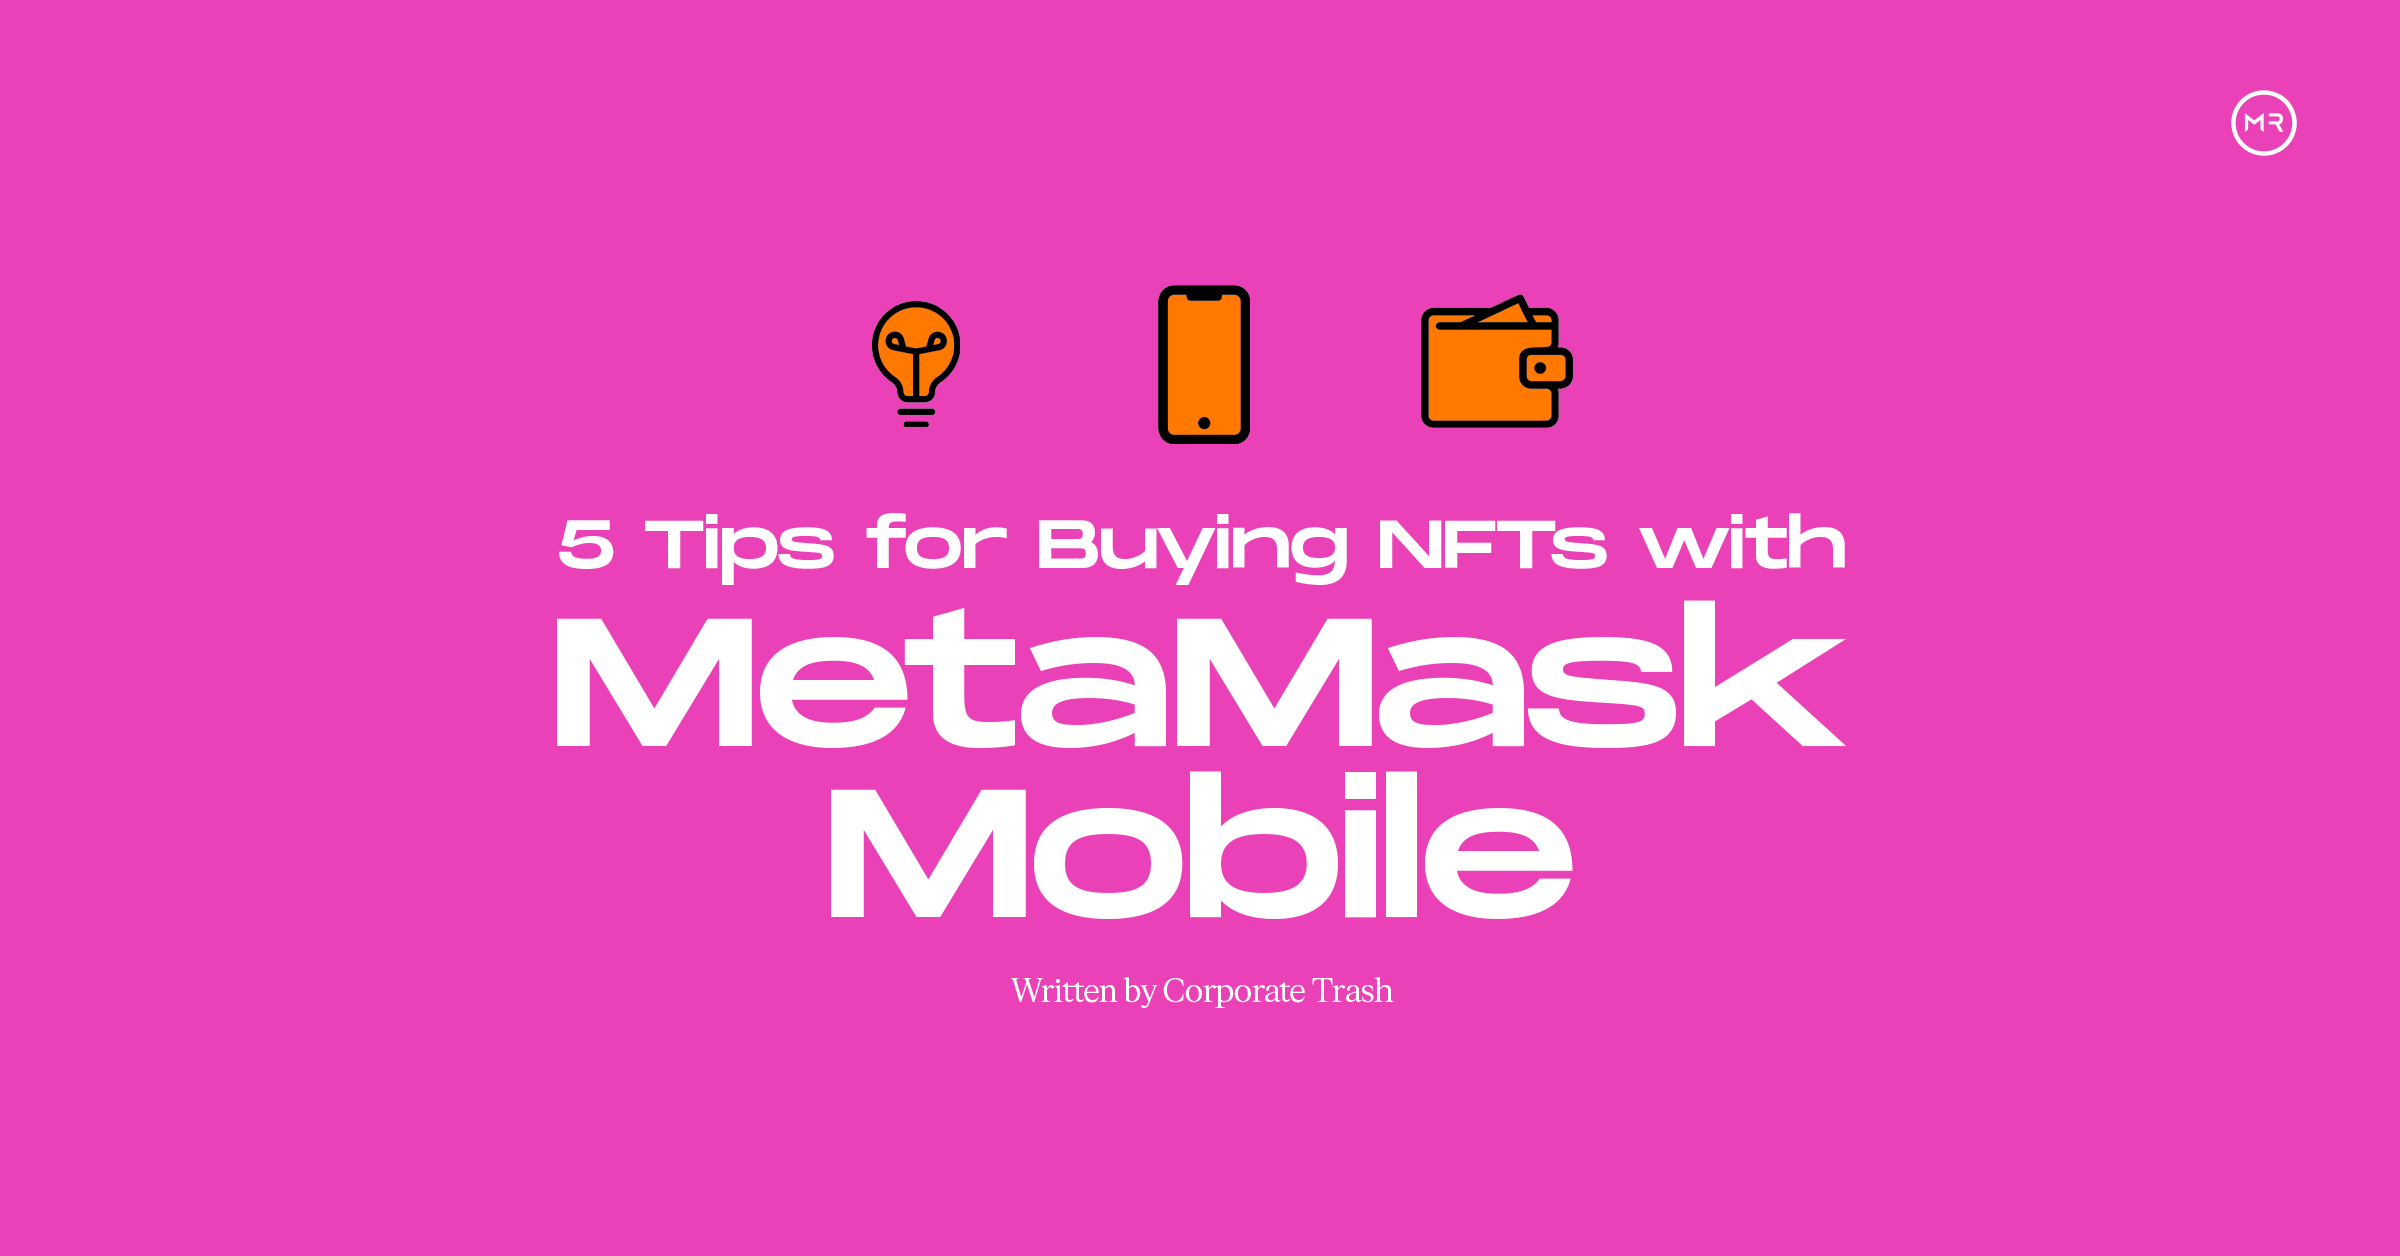 5 Tips for Buying NFTs with MetaMask Mobile